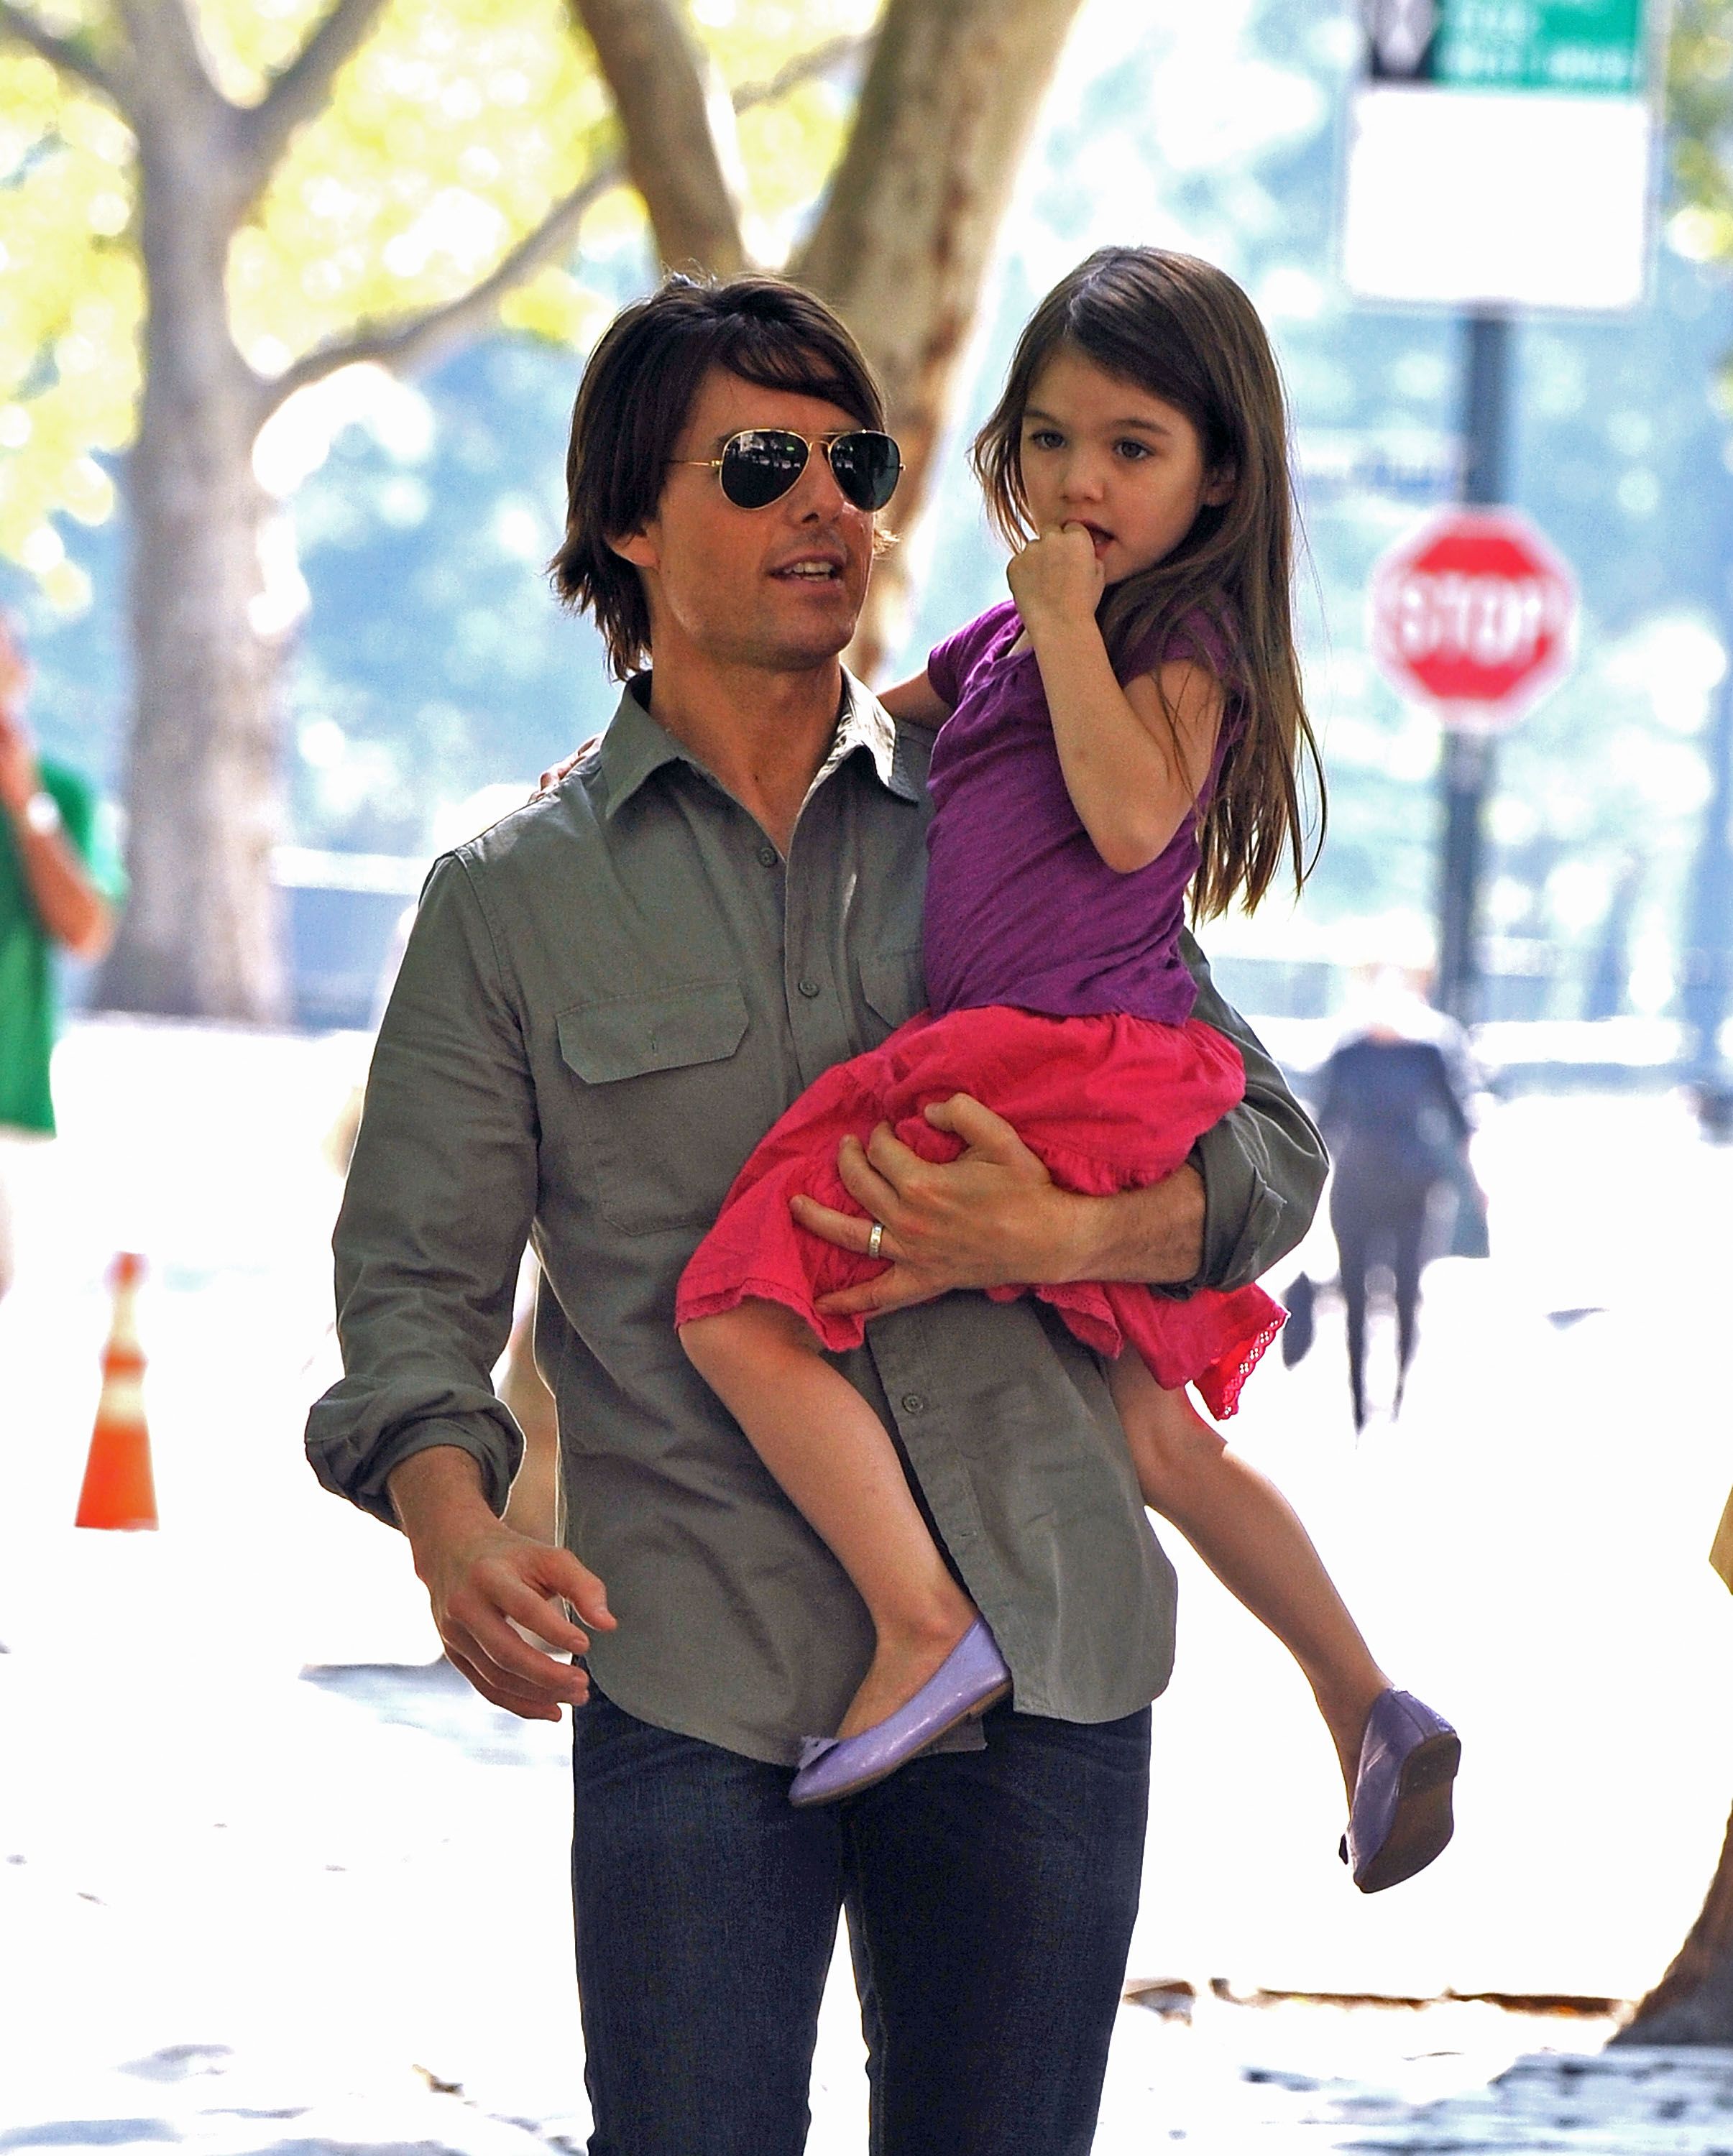 Tom and Suri Cruise visit a Central Park West playground on September 7, 2010, in New York City. | Source: James Devaney/WireImage/Getty Images